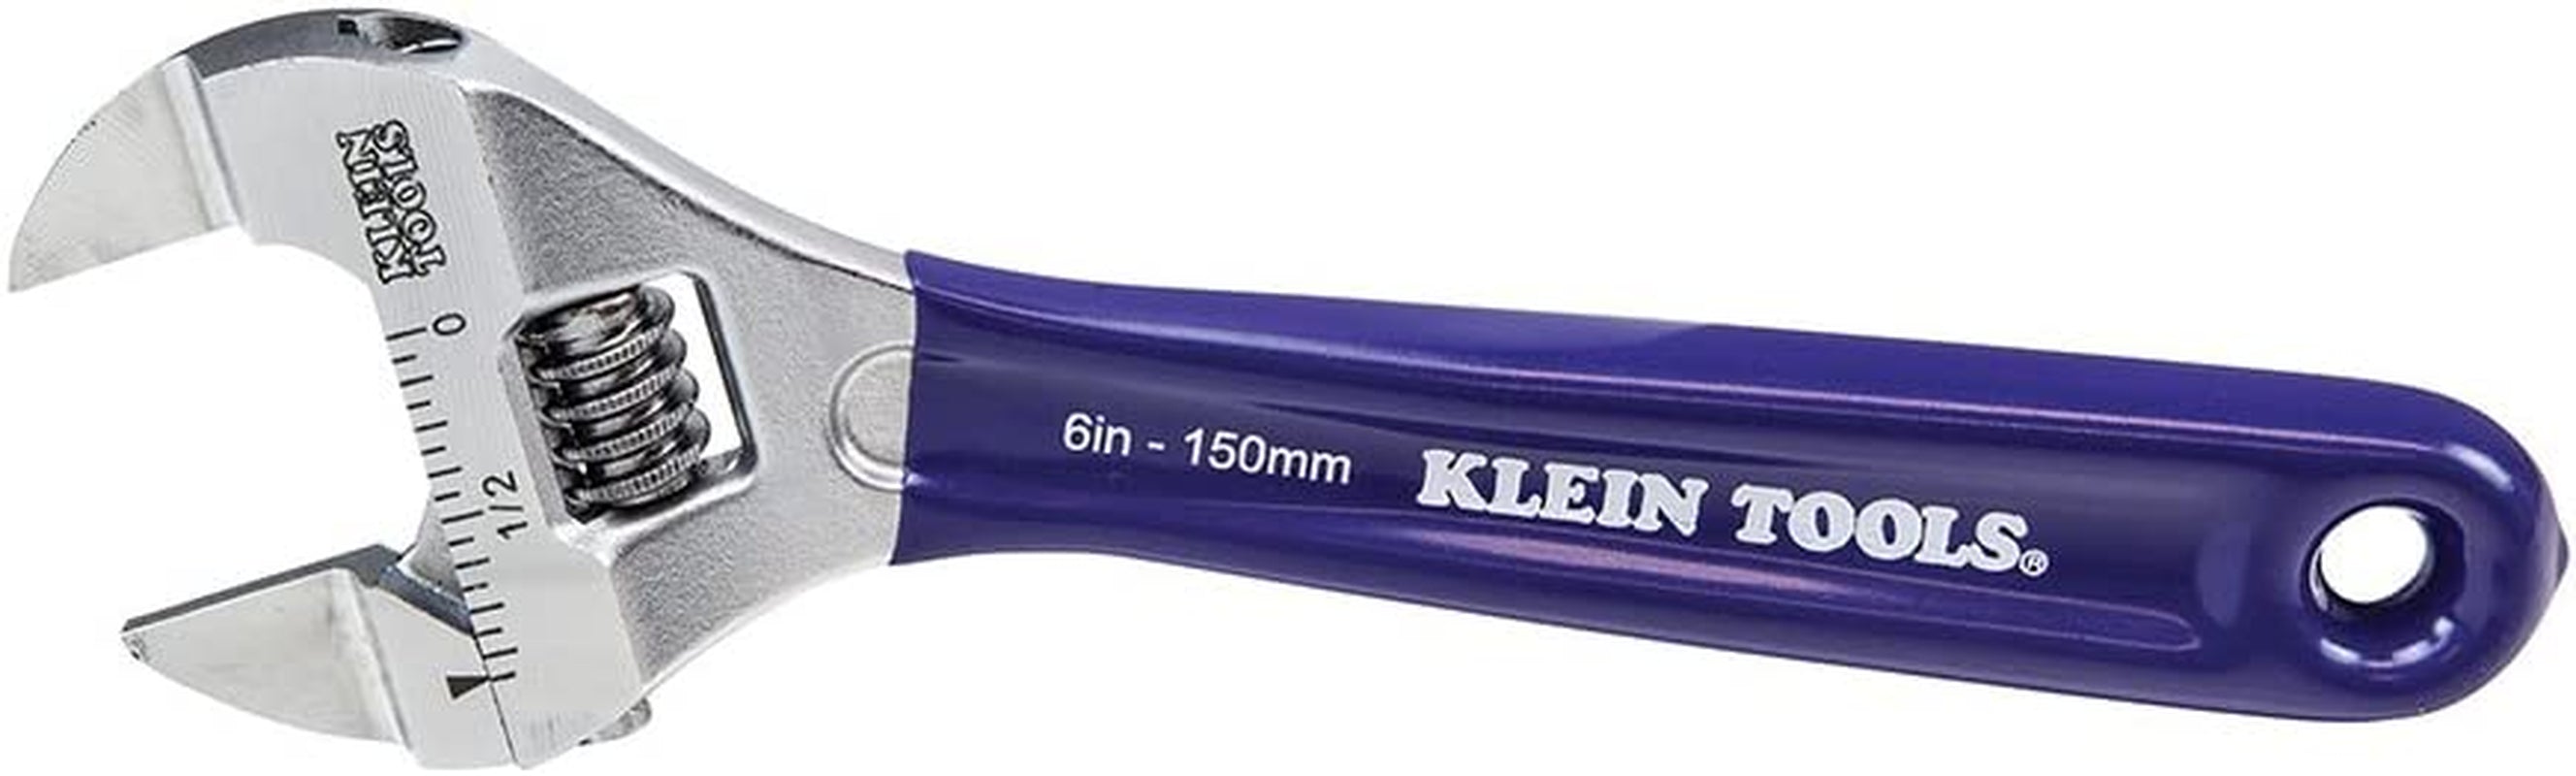 KLEIN TOOLS, Klein Tools D86932 Adjustable Wrench, Forged with Slimmer Jaw and a High Polish Chrome Finish, 4-Inch